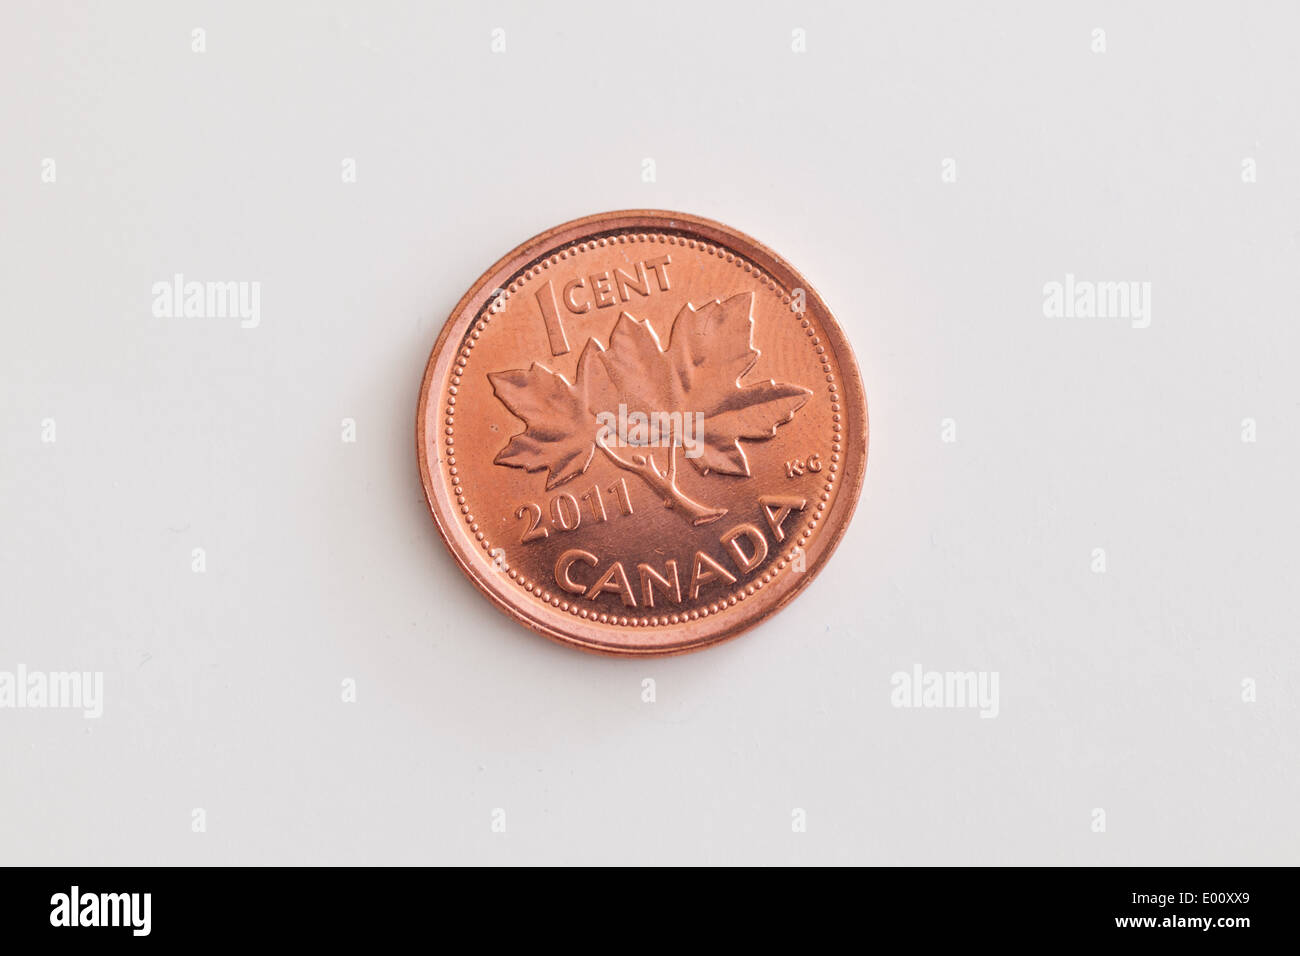 A Canadian penny (one cent coin, 1 cent coin). Stock Photo